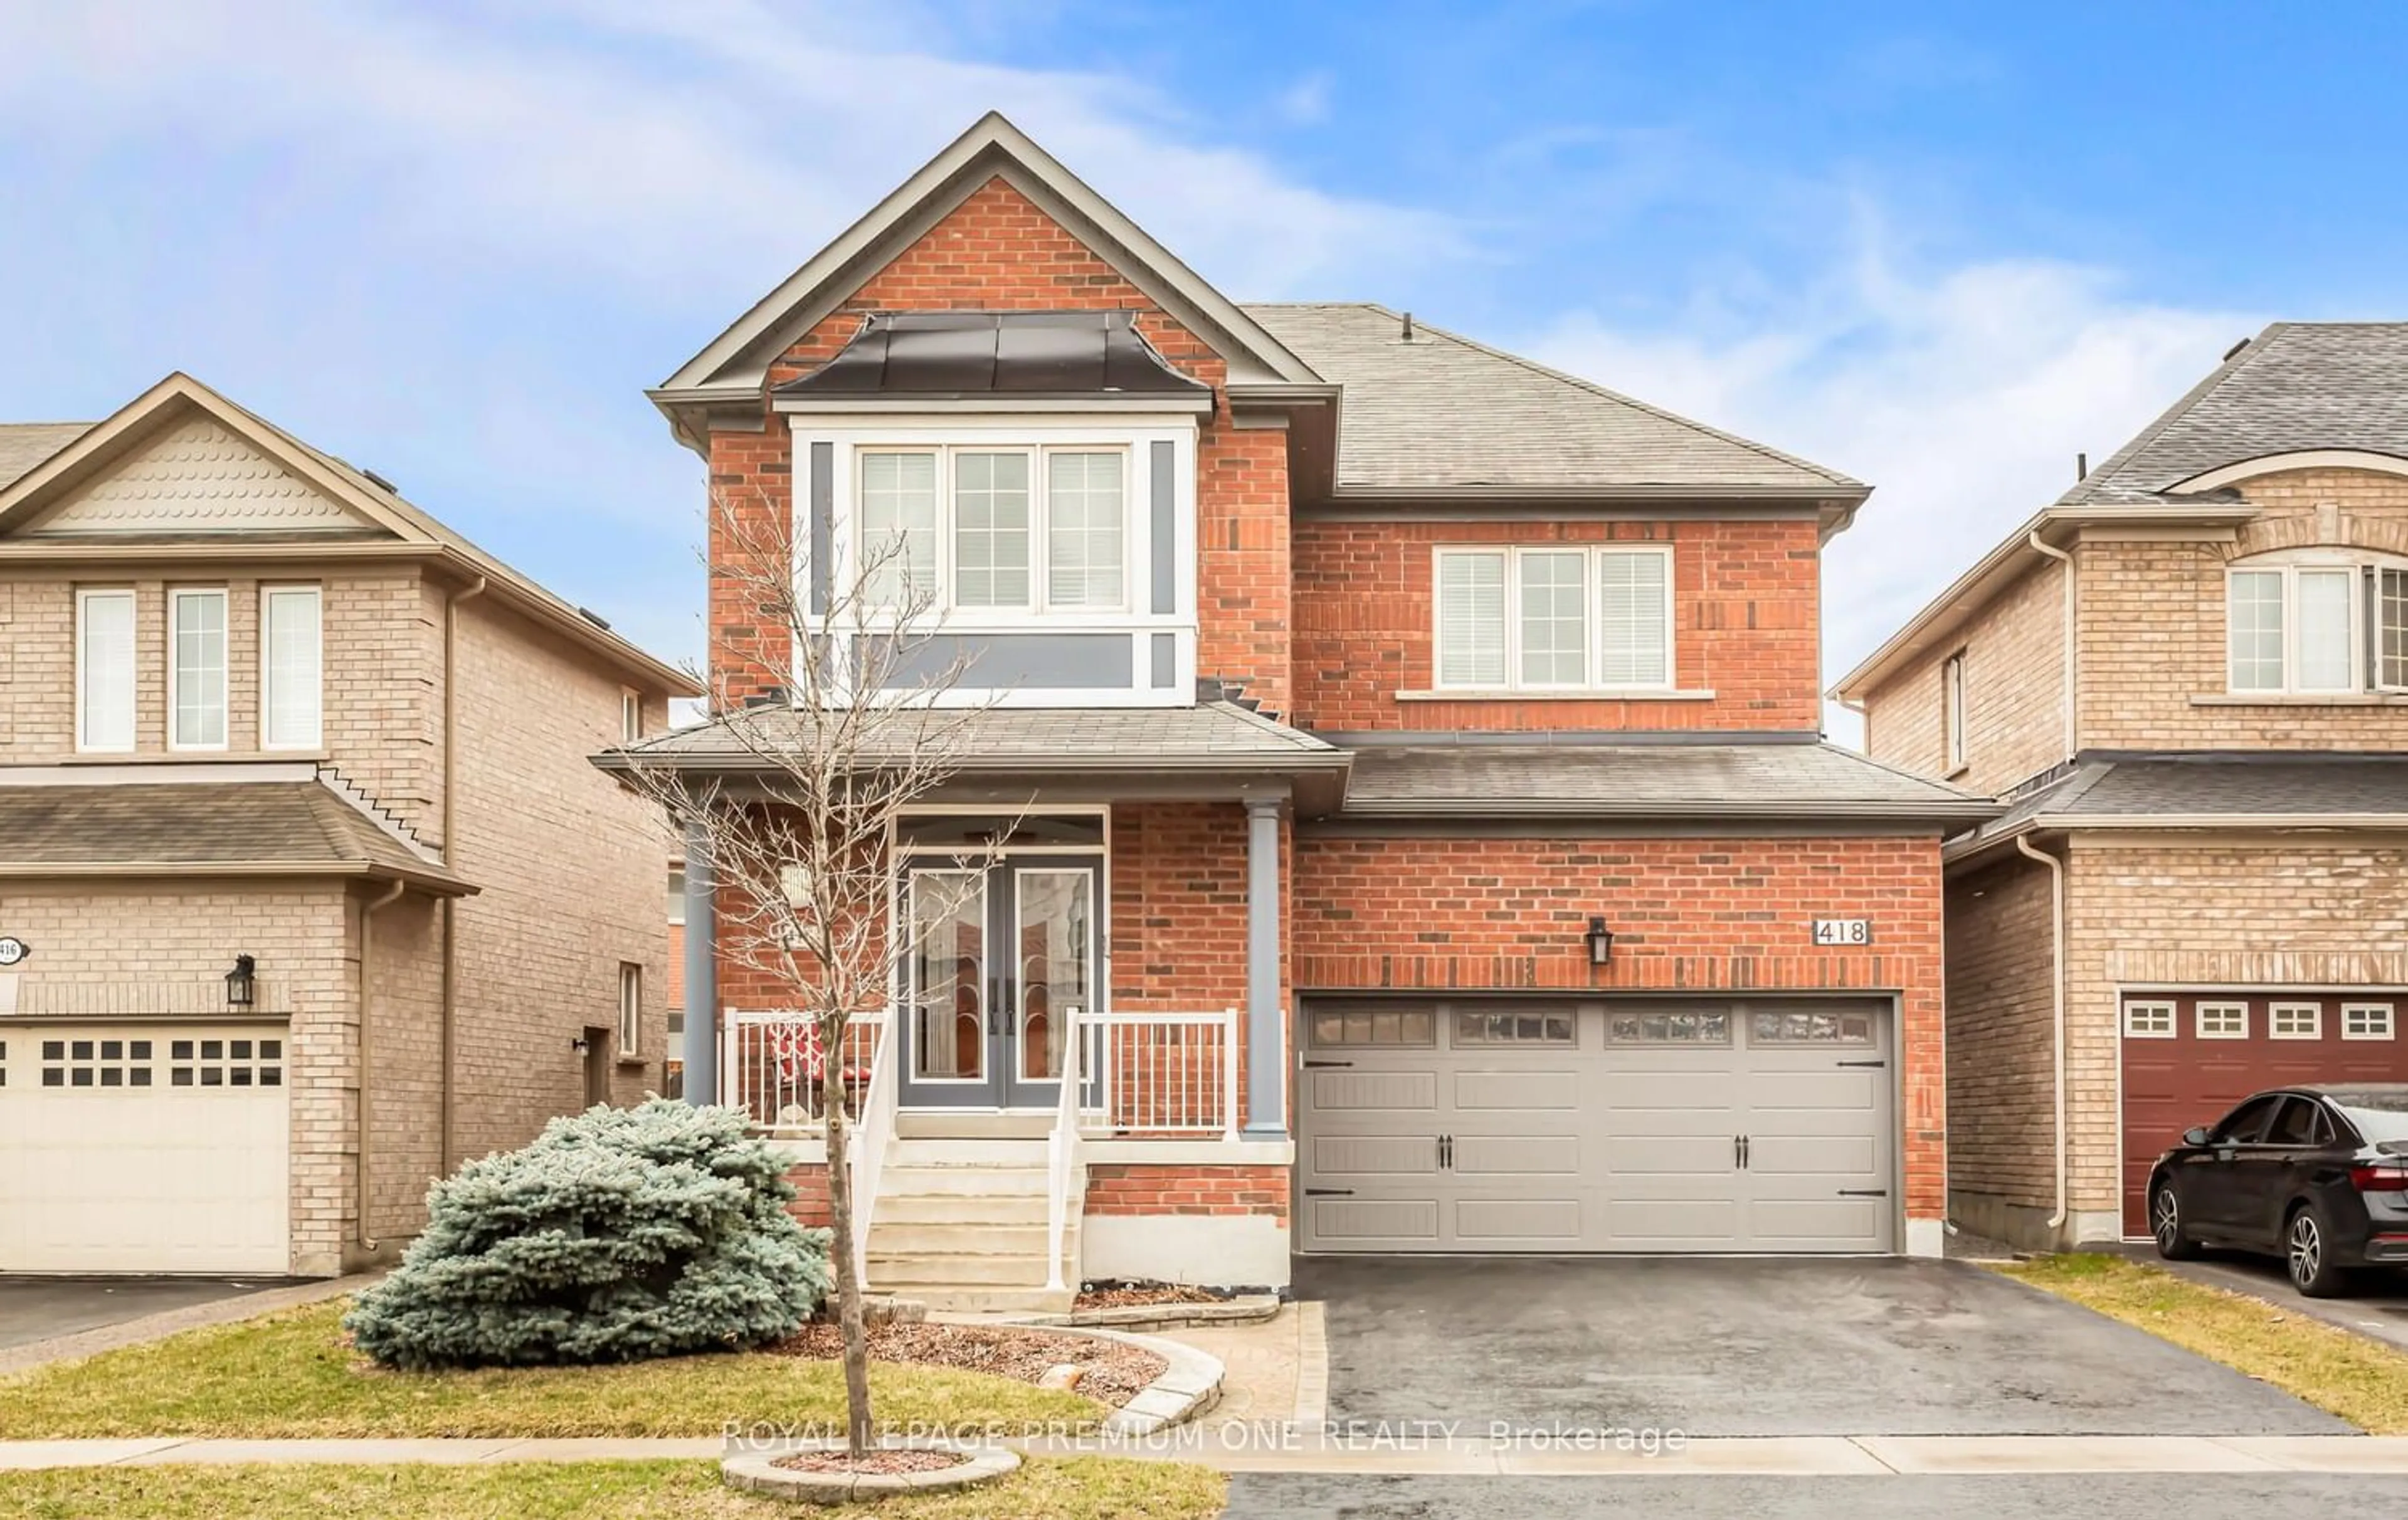 Home with brick exterior material for 418 Sunny Meadow Blvd, Brampton Ontario L6R 0H5